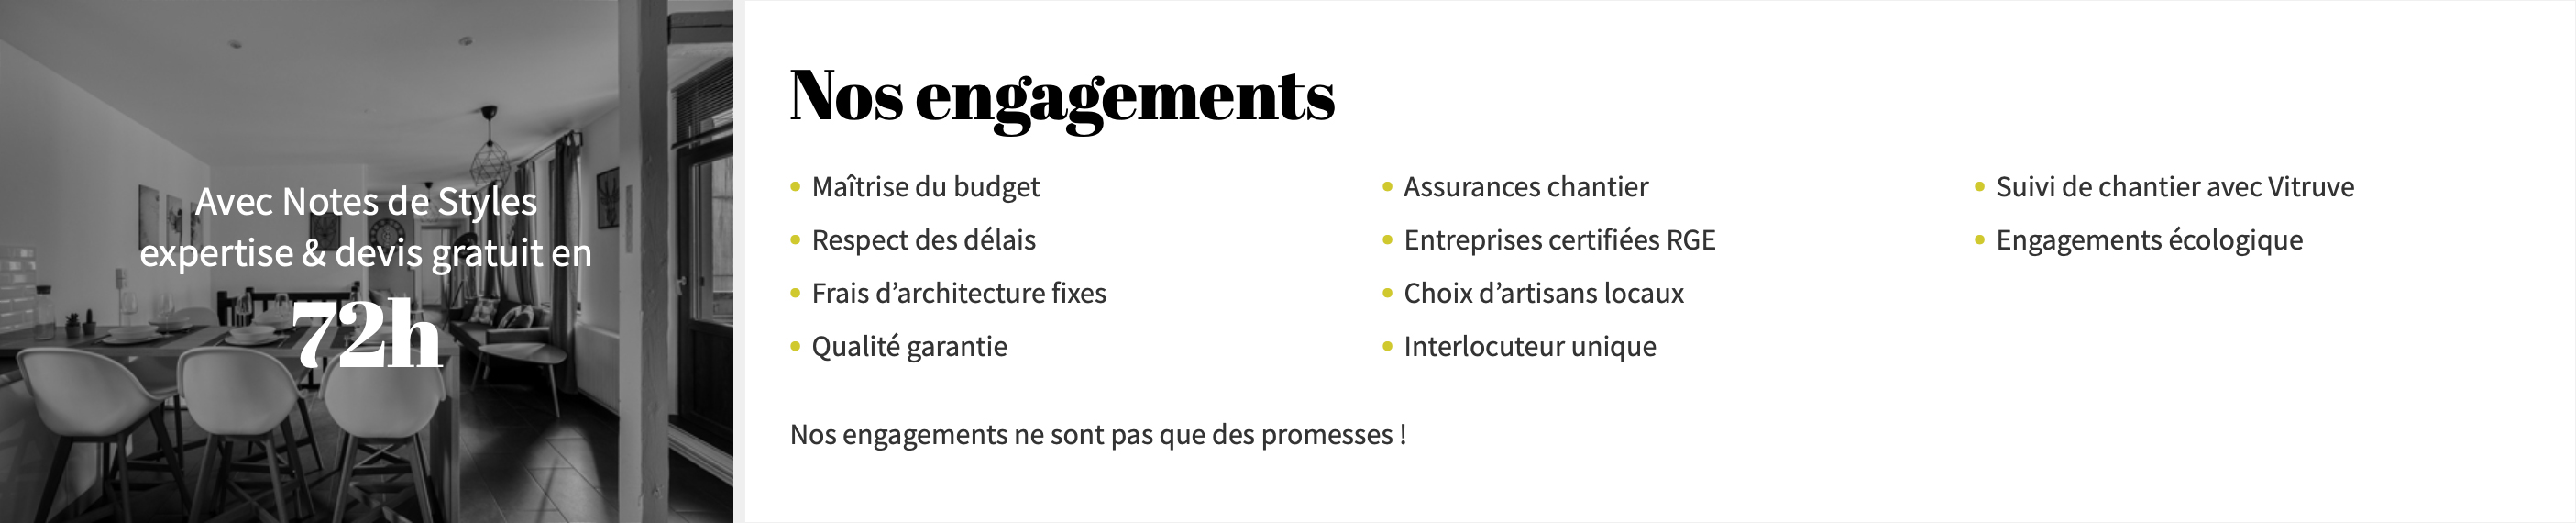 Notes de Styles Bayonne - Nos engagements